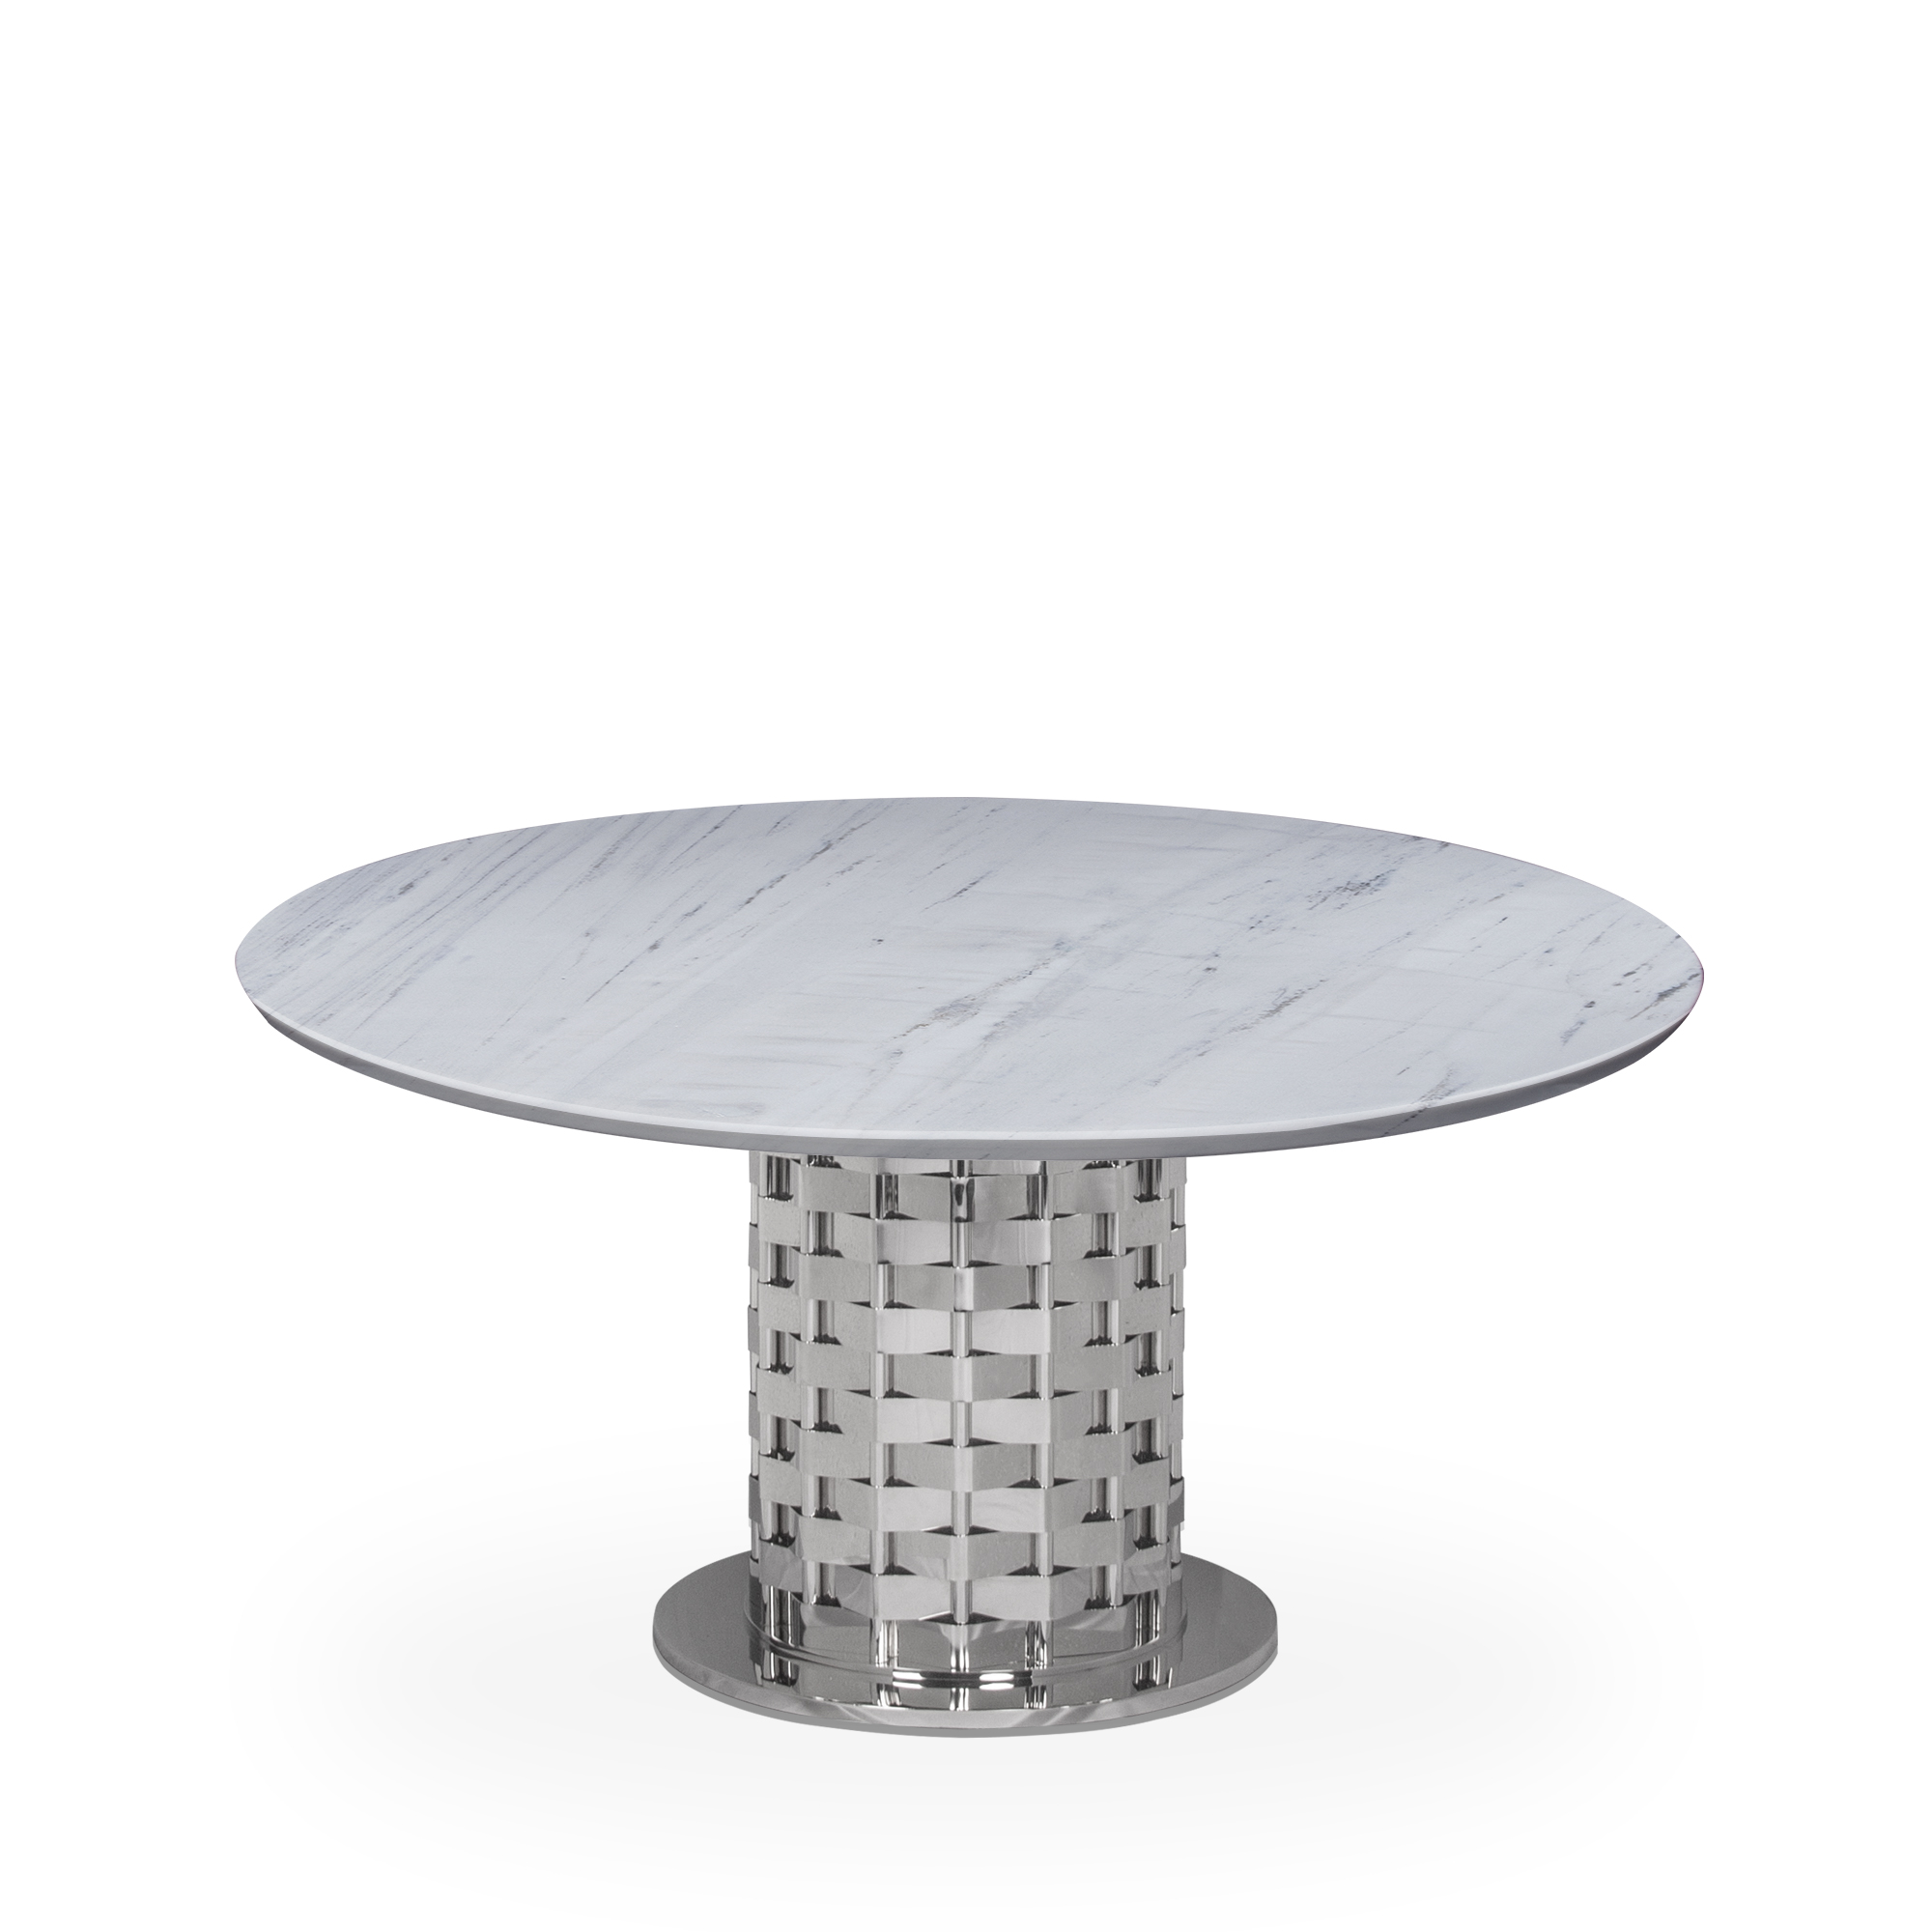 Bertrand | Art Series | Decasa Marble Marble Dining Table